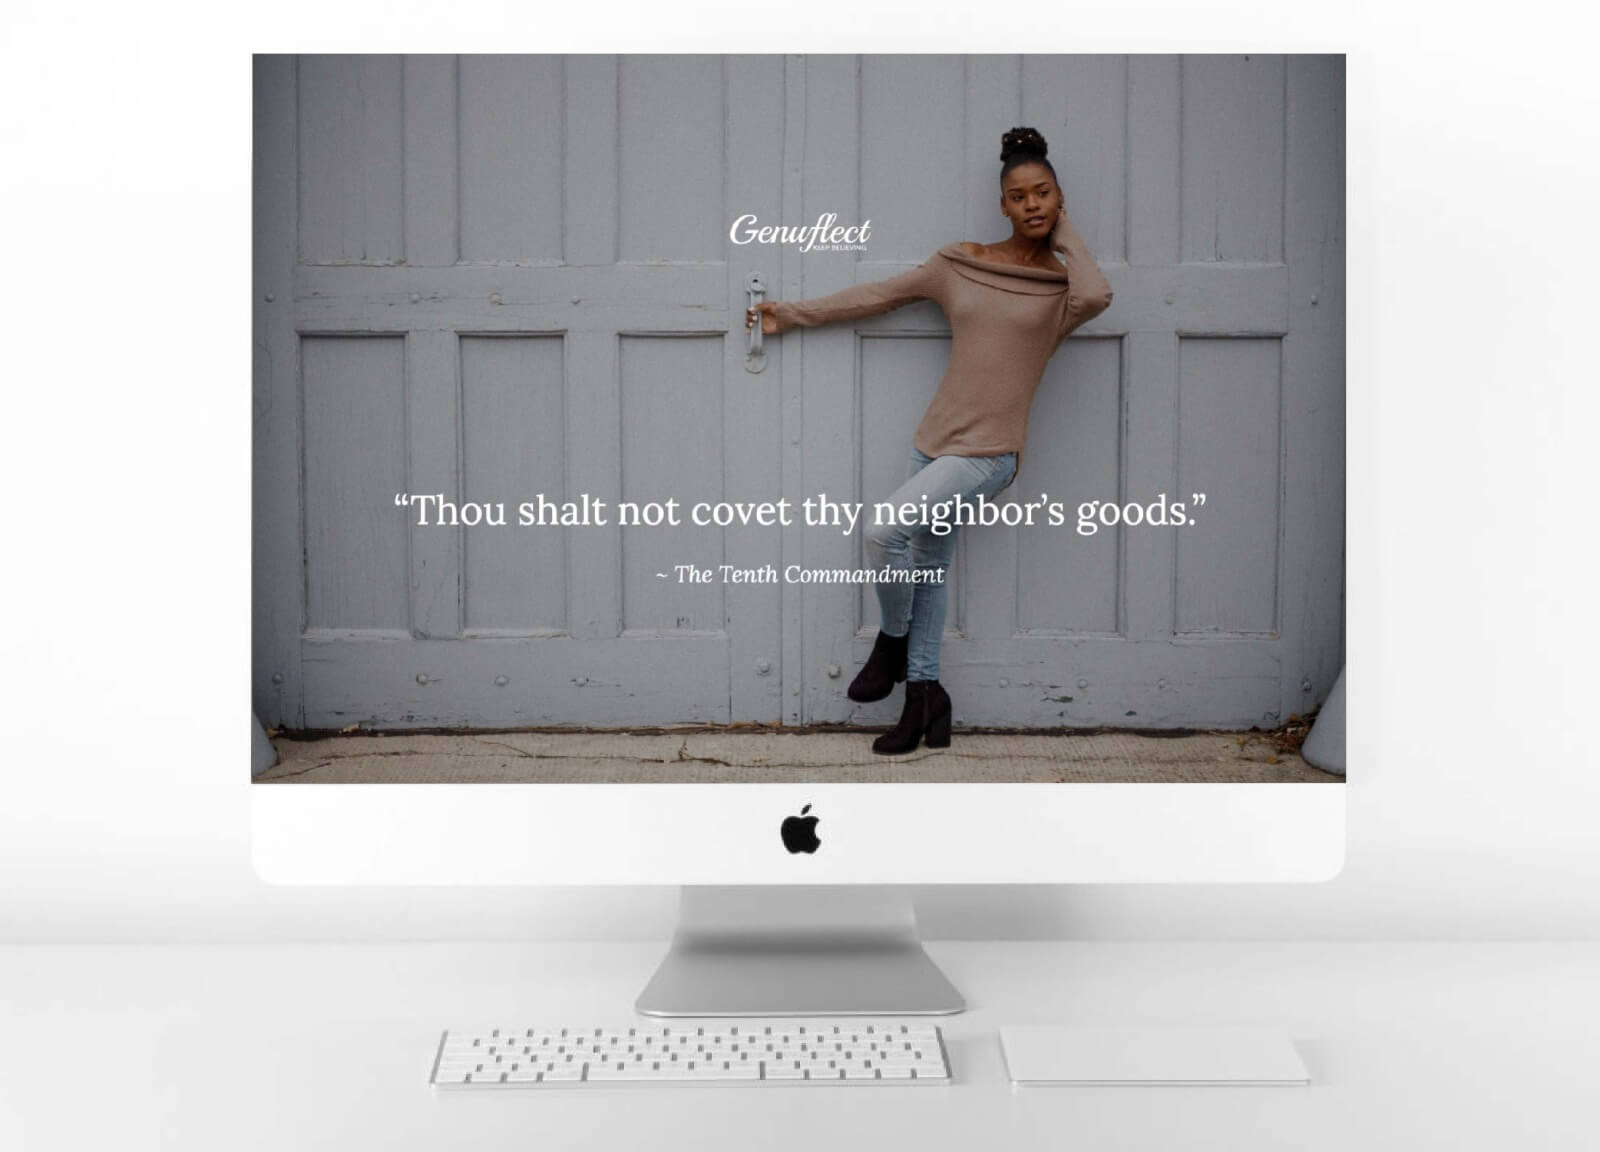 Genuflect computer background image of a Woman in front of a white garage door holding on to the door handle